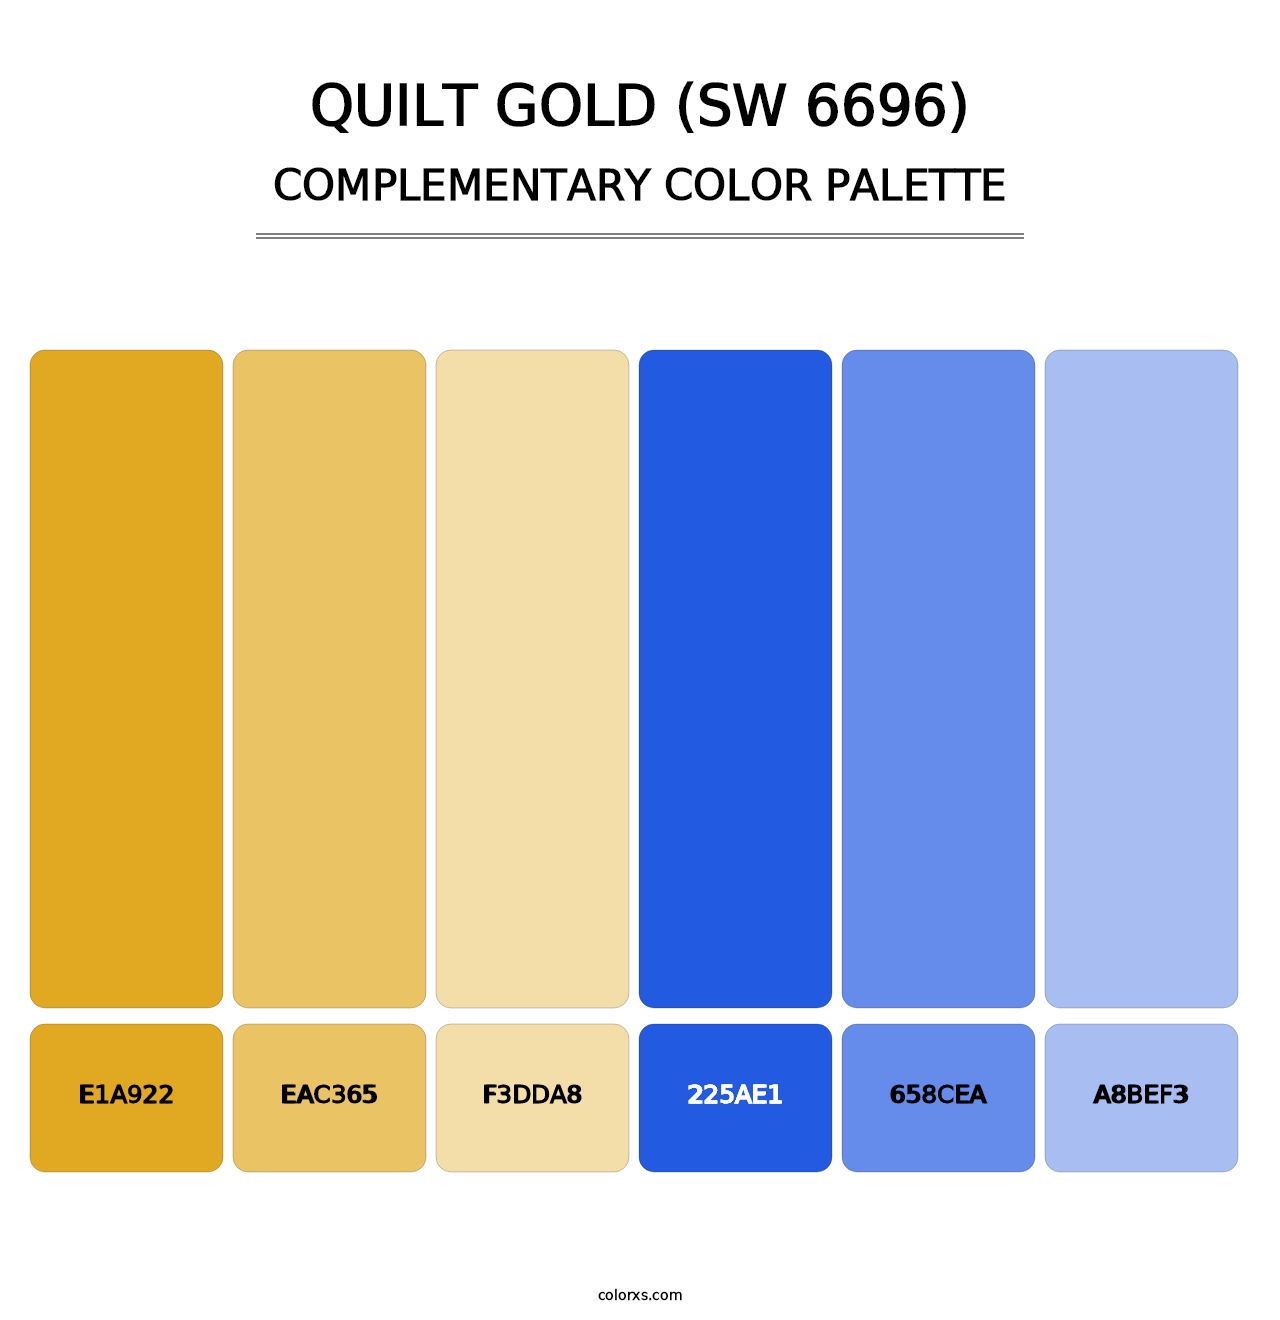 Quilt Gold (SW 6696) - Complementary Color Palette